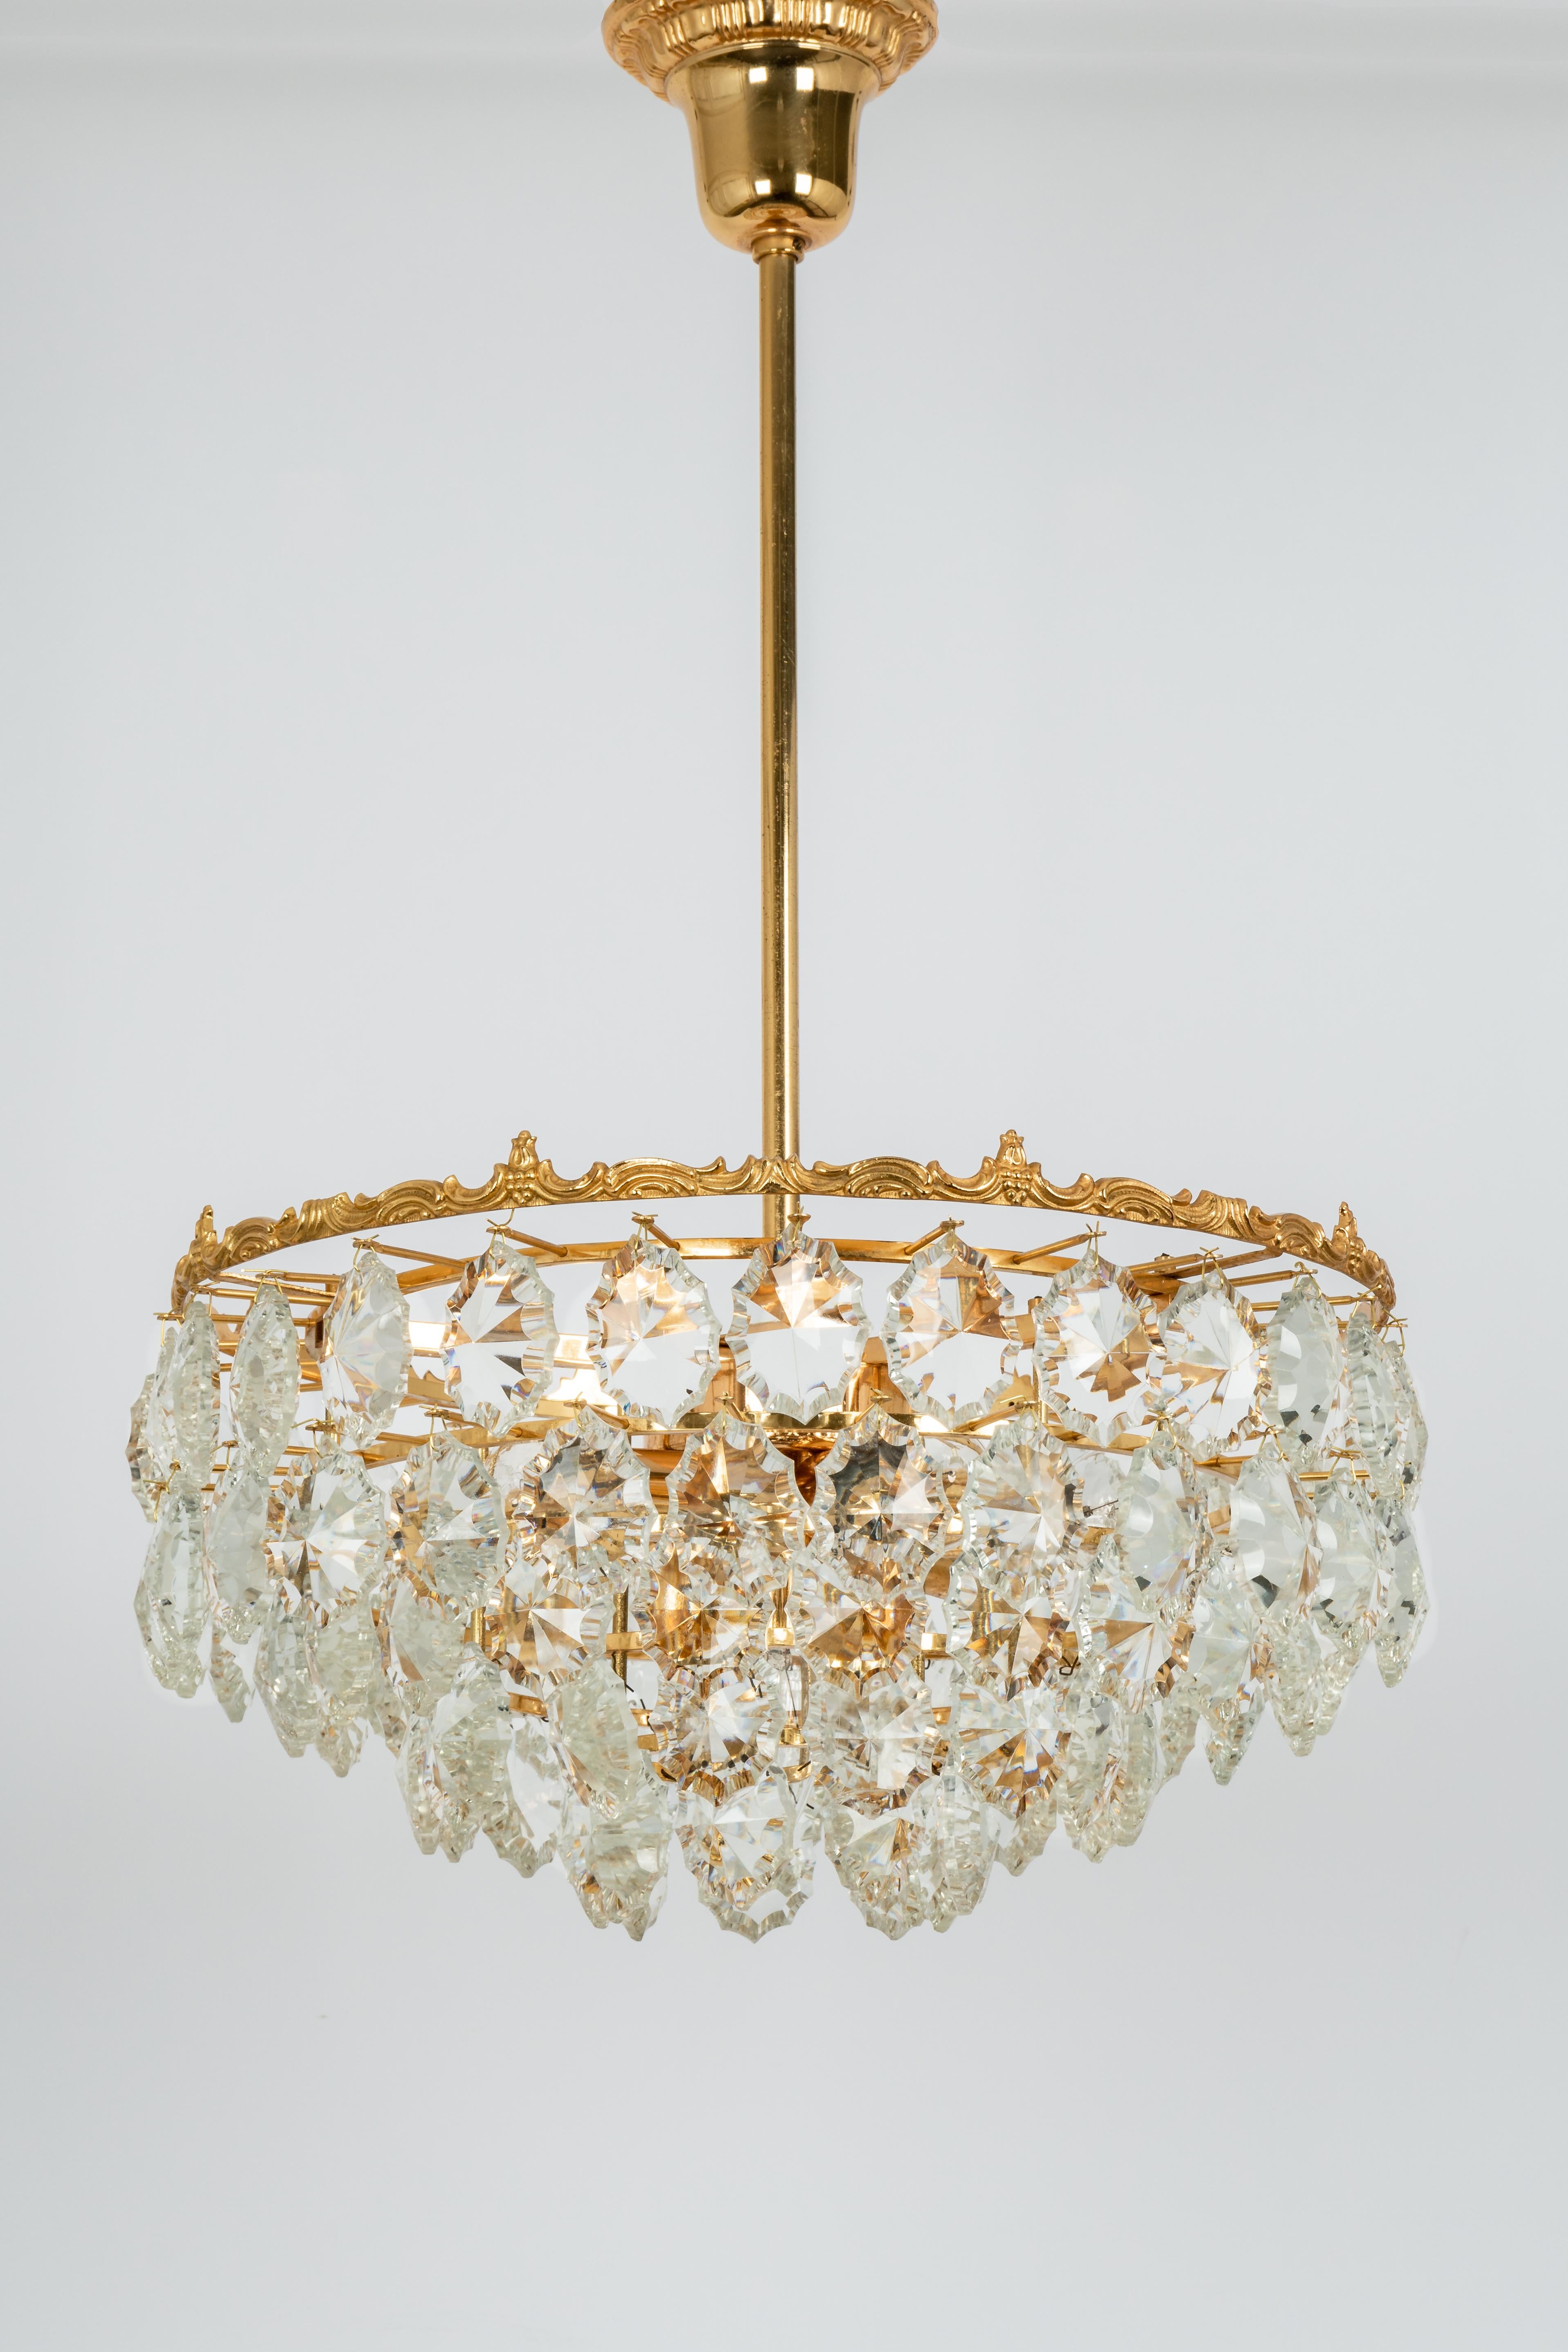 A stunning five-tier chandelier by Bakalowits & Sohne, Austria, manufactured in circa 1960-1969. A handmade and high quality piece. The ceiling fixture and the frame are made of gilt brass and has six rings with lots of facetted crystal glass